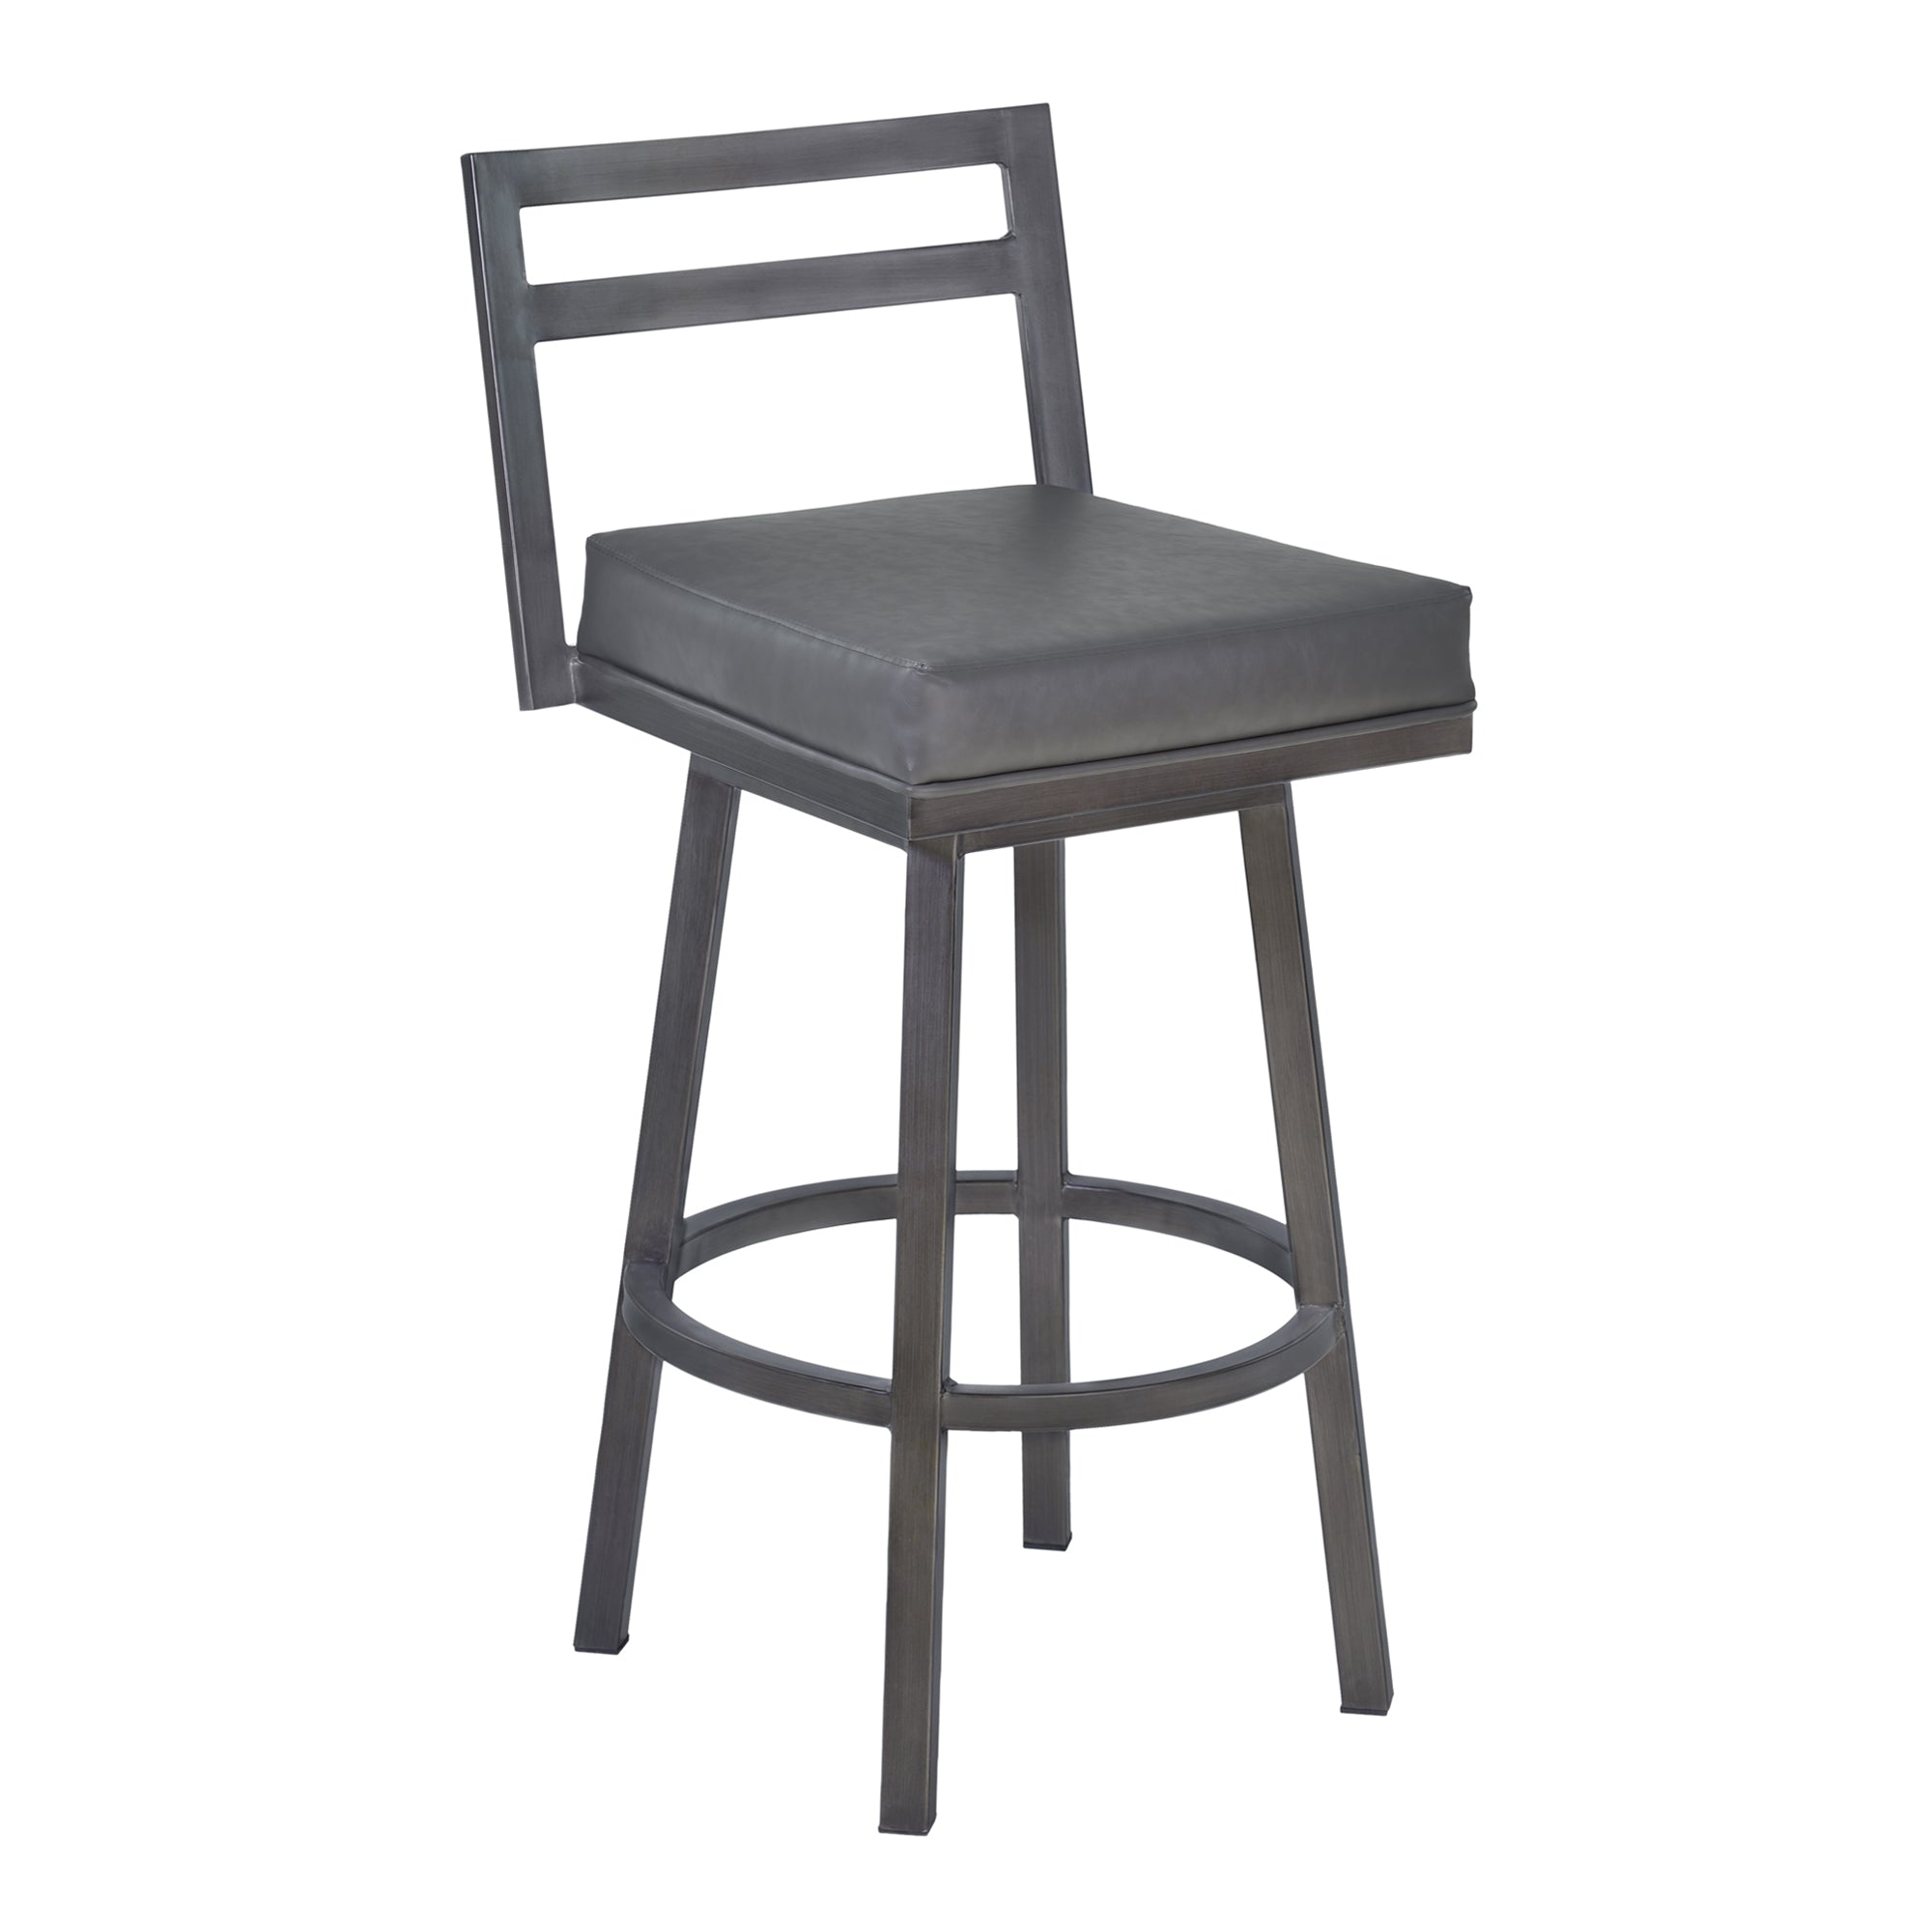 Armen Living Lcmobavg30 Moniq 30" Bar Height Metal Swivel Barstool In Vintage Grey Faux Leather And Mineral Finish